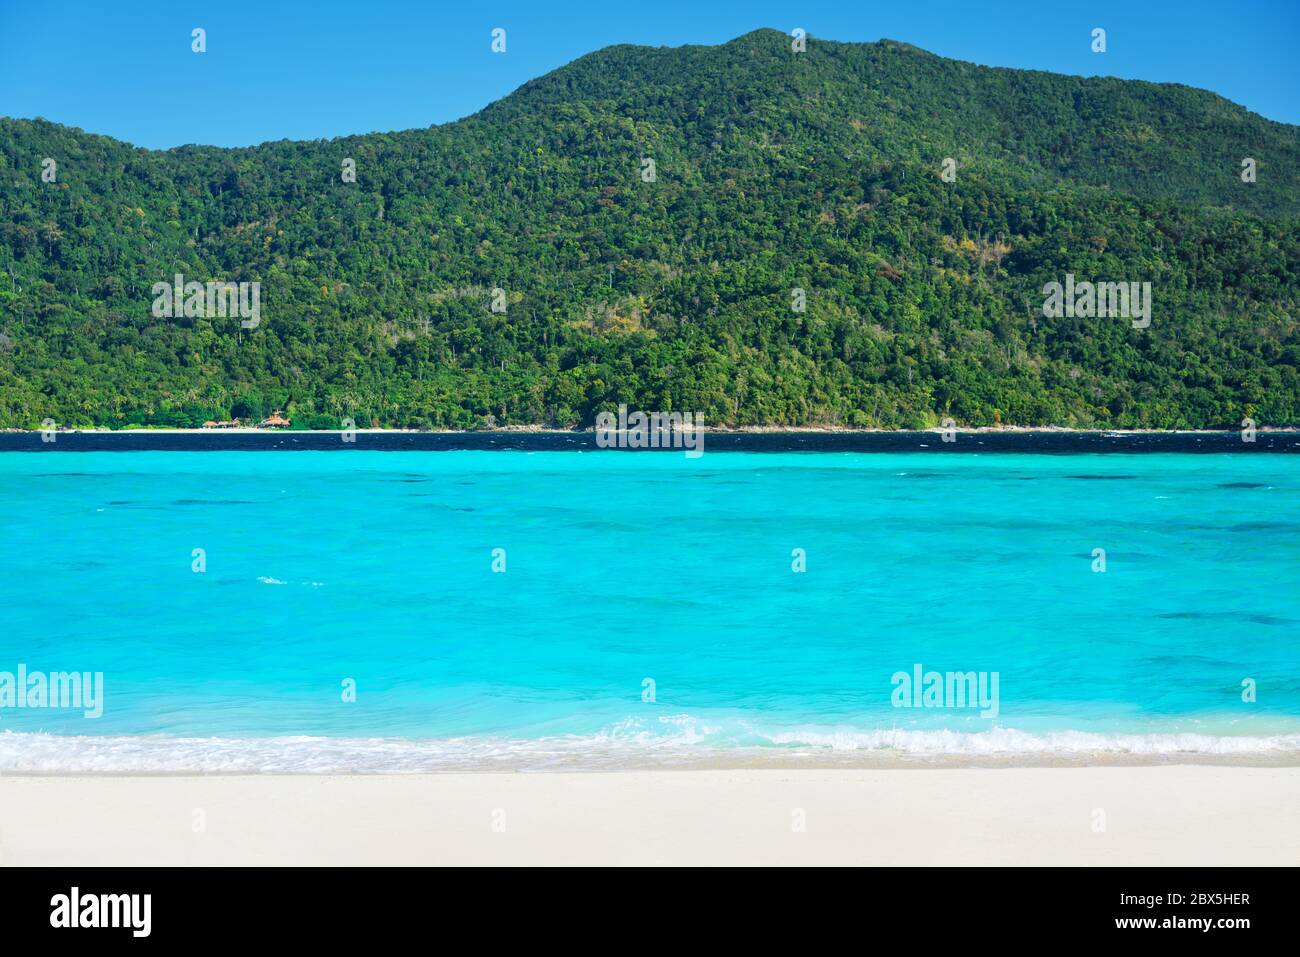 Tropical beach with turquoise clear sea and white sand. Summer vacation, travel, nature background concept Stock Photo